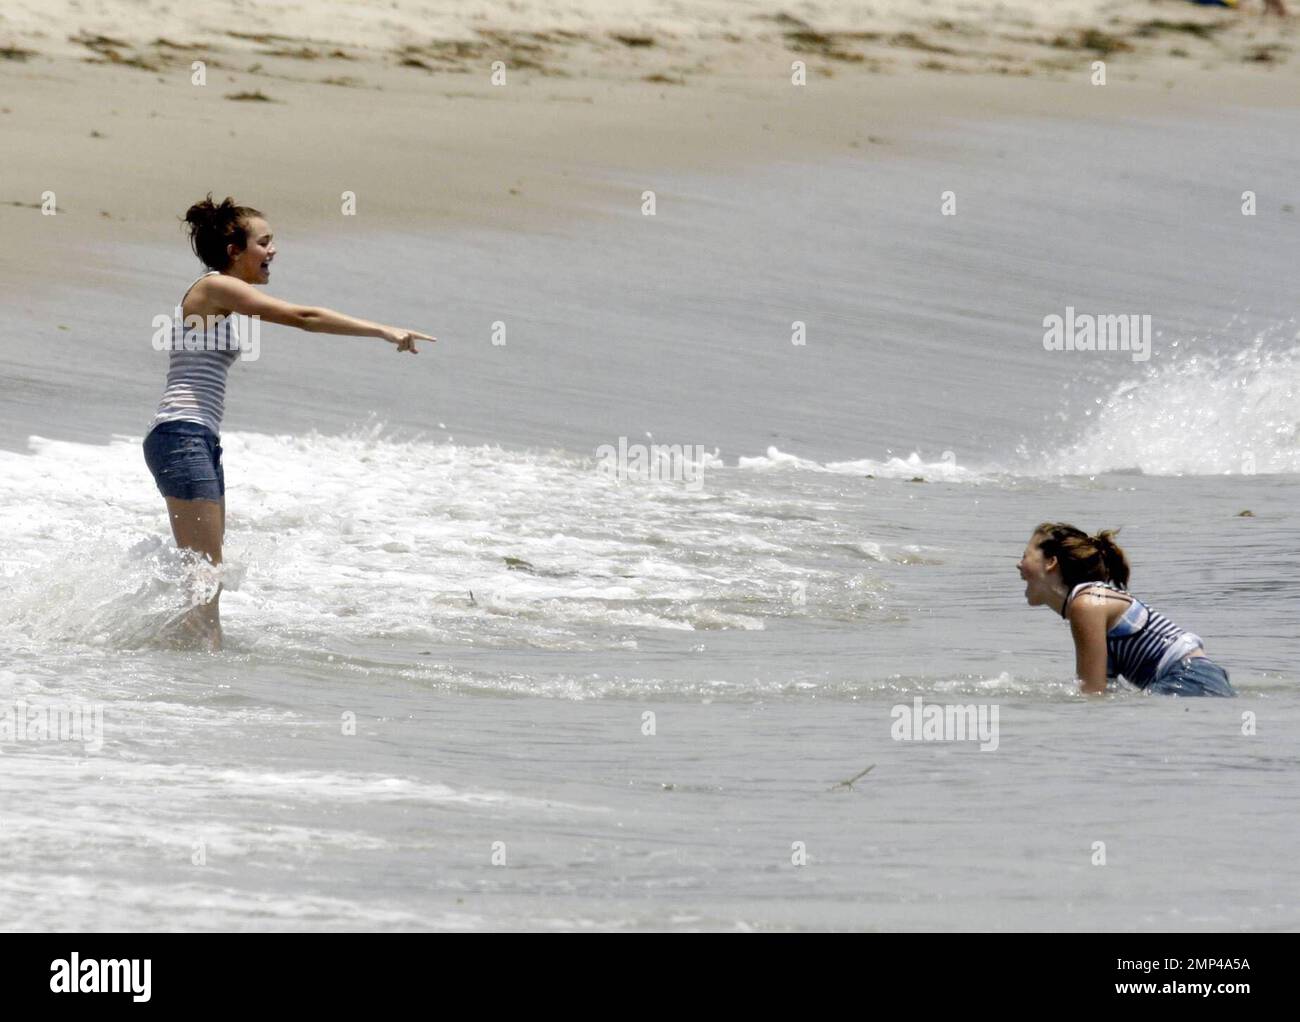 Miley Cyrus Frolics In The Surf With Friends Castmates While Filming Her Latest Hannah Montana